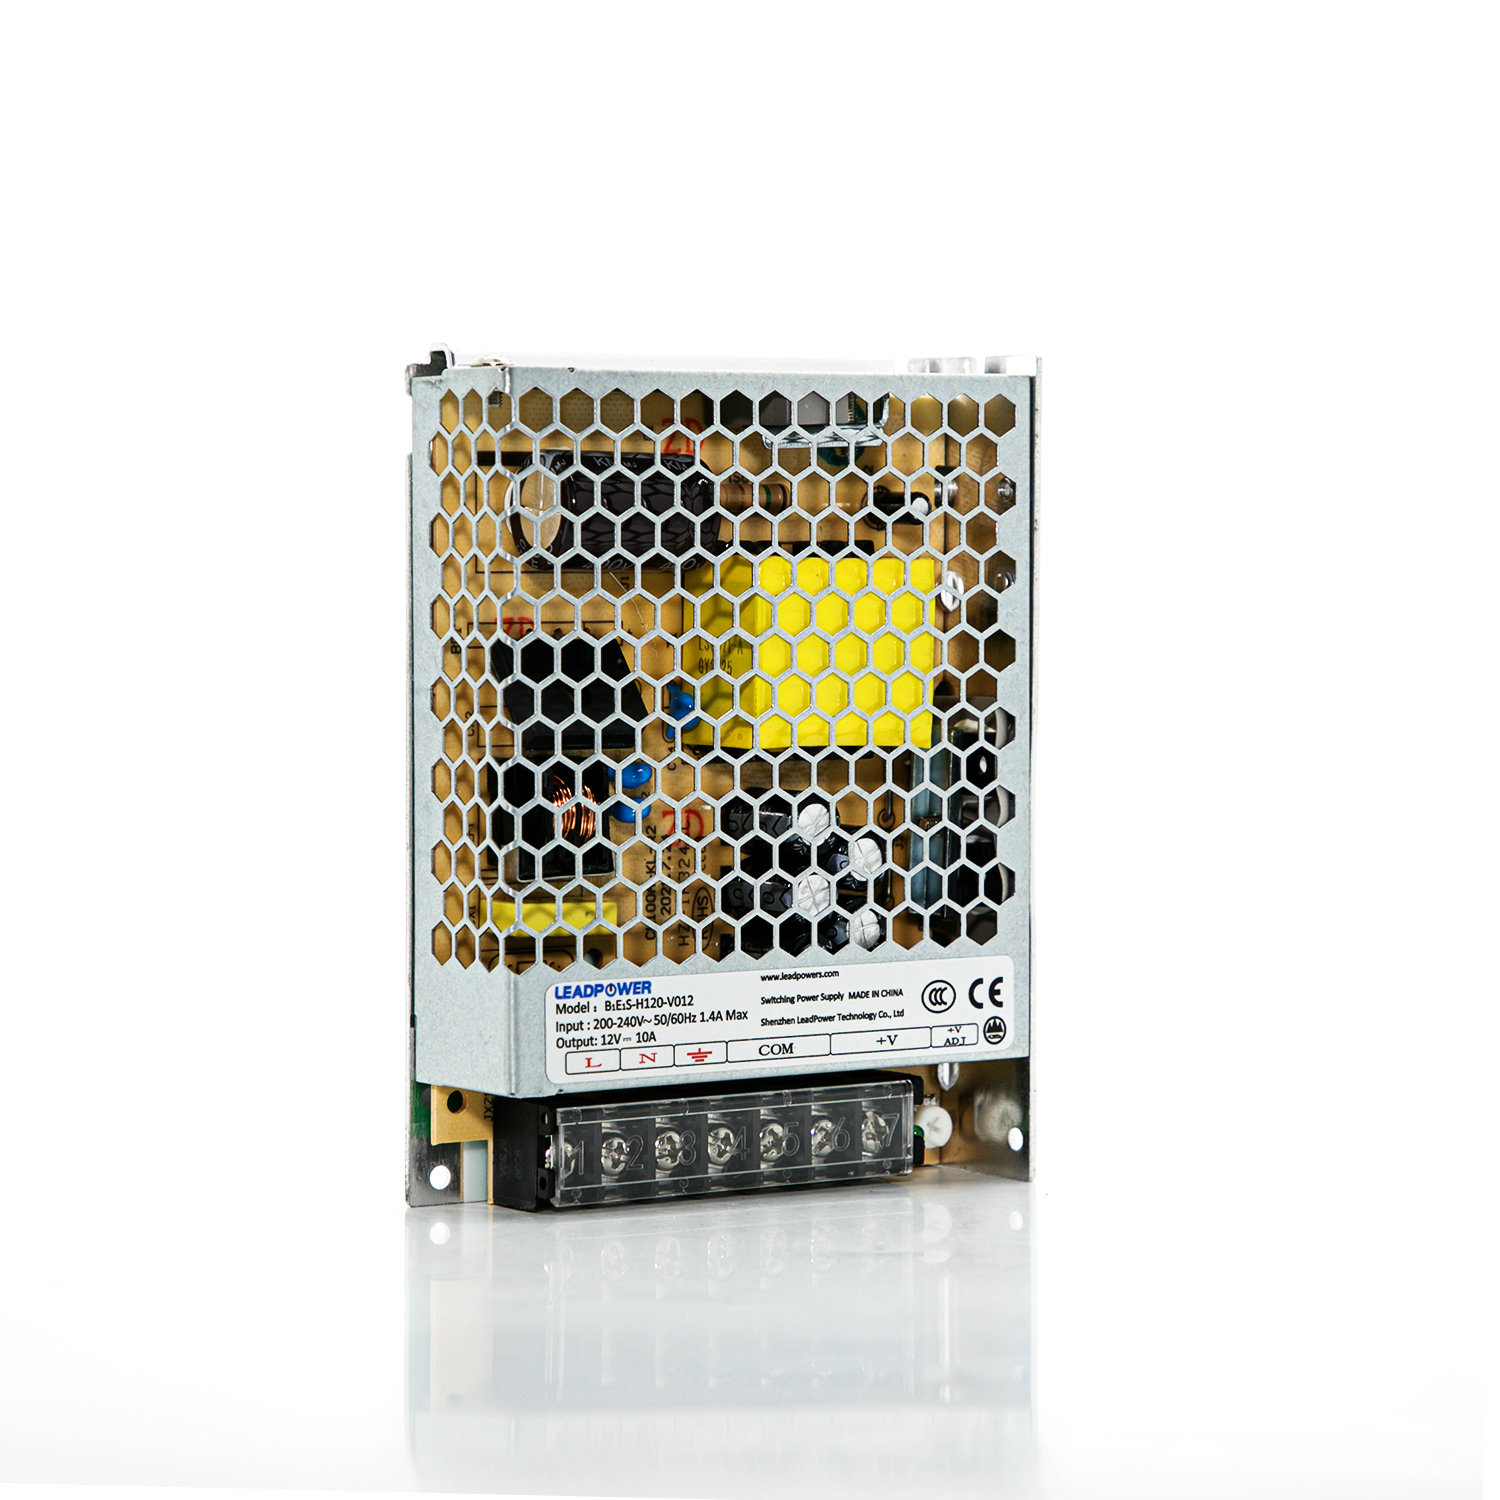 BBN-H120 Series Built in LED Power Supply